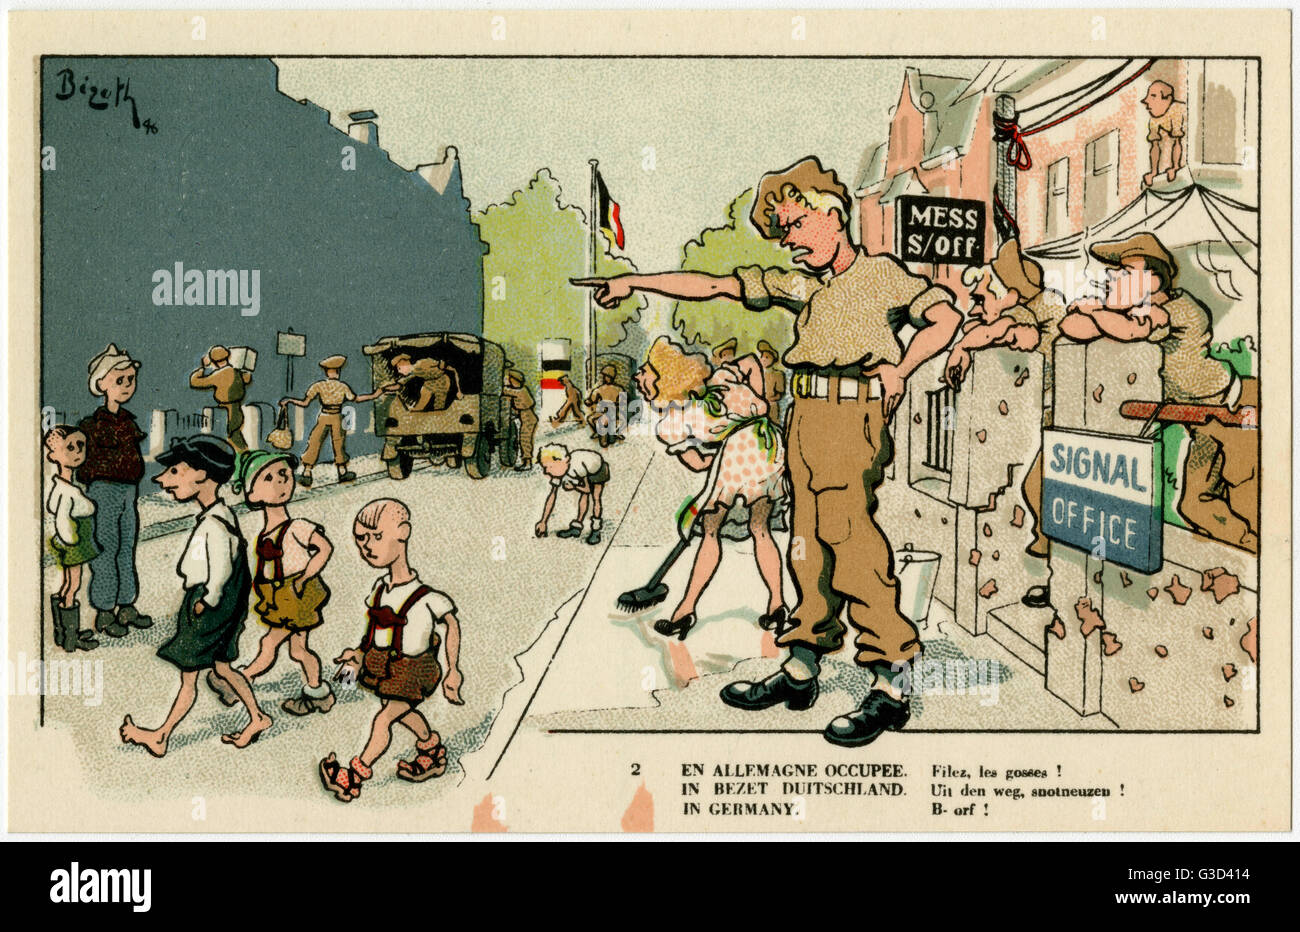 Occupied Germany - German children sent packing Stock Photo